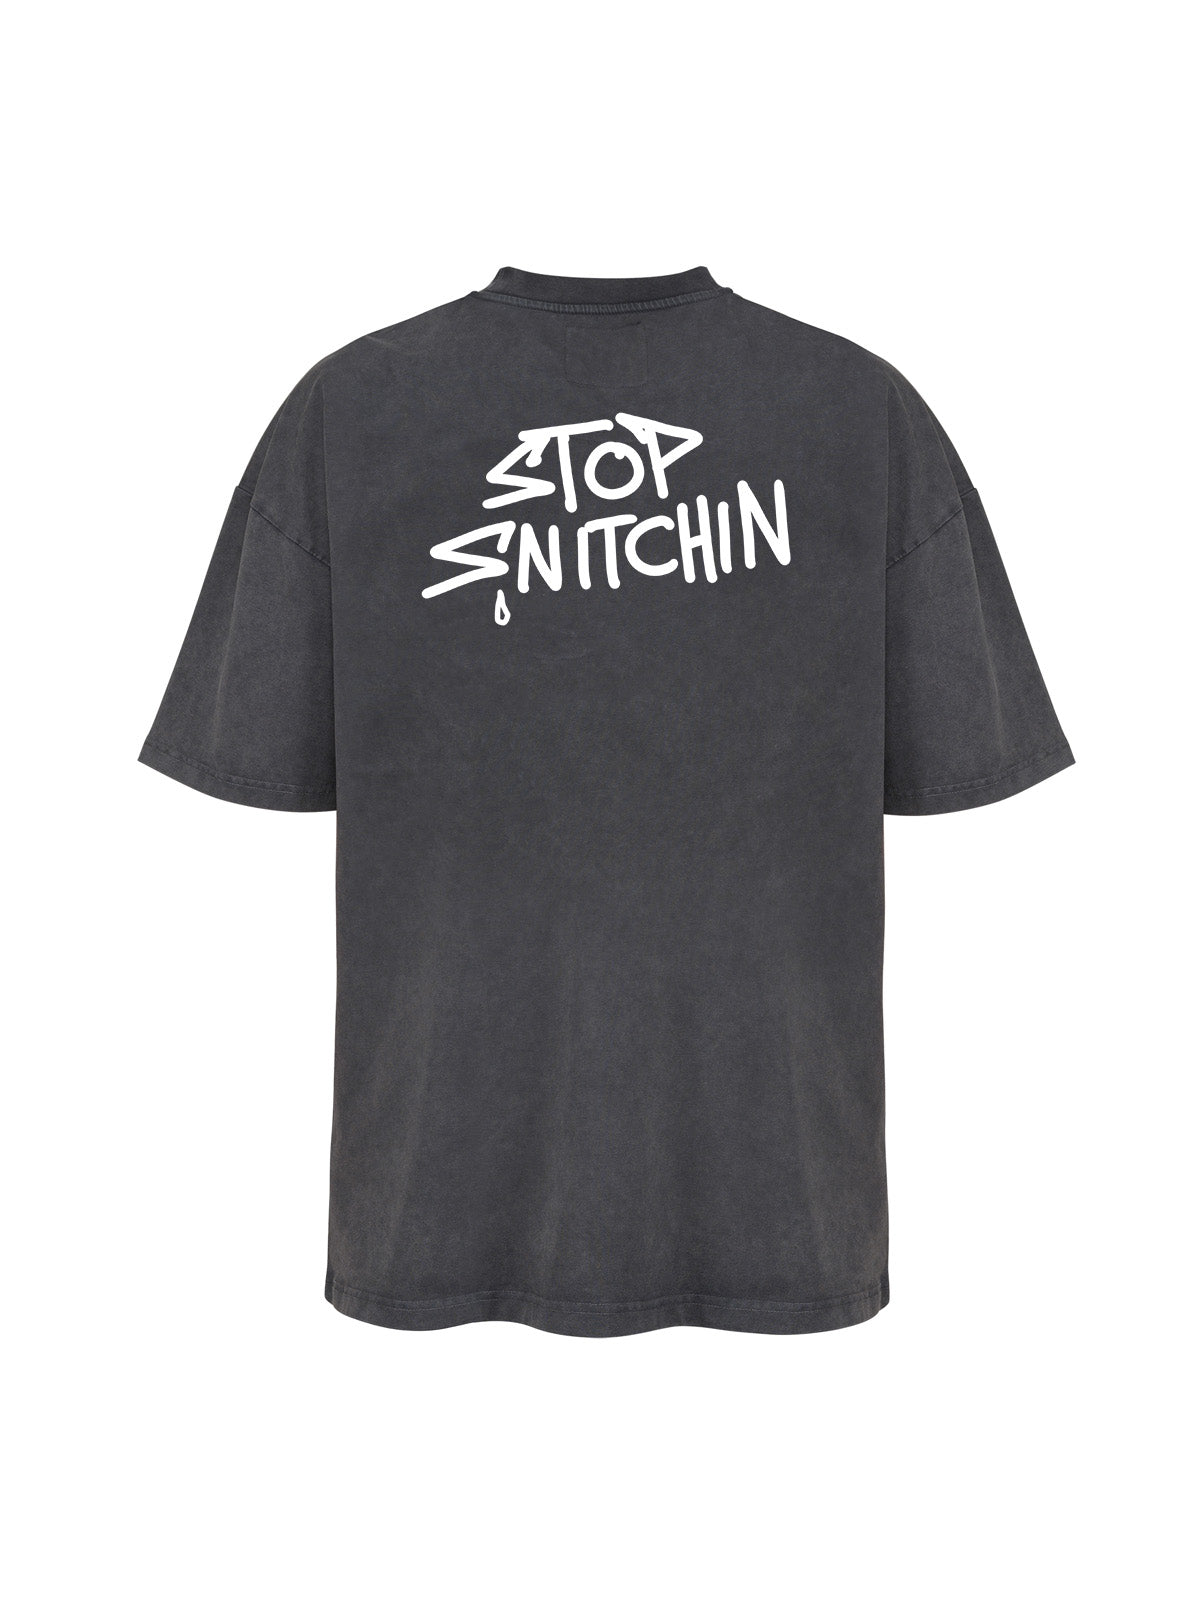 UNREAL Stop Snitchin Tee Washed